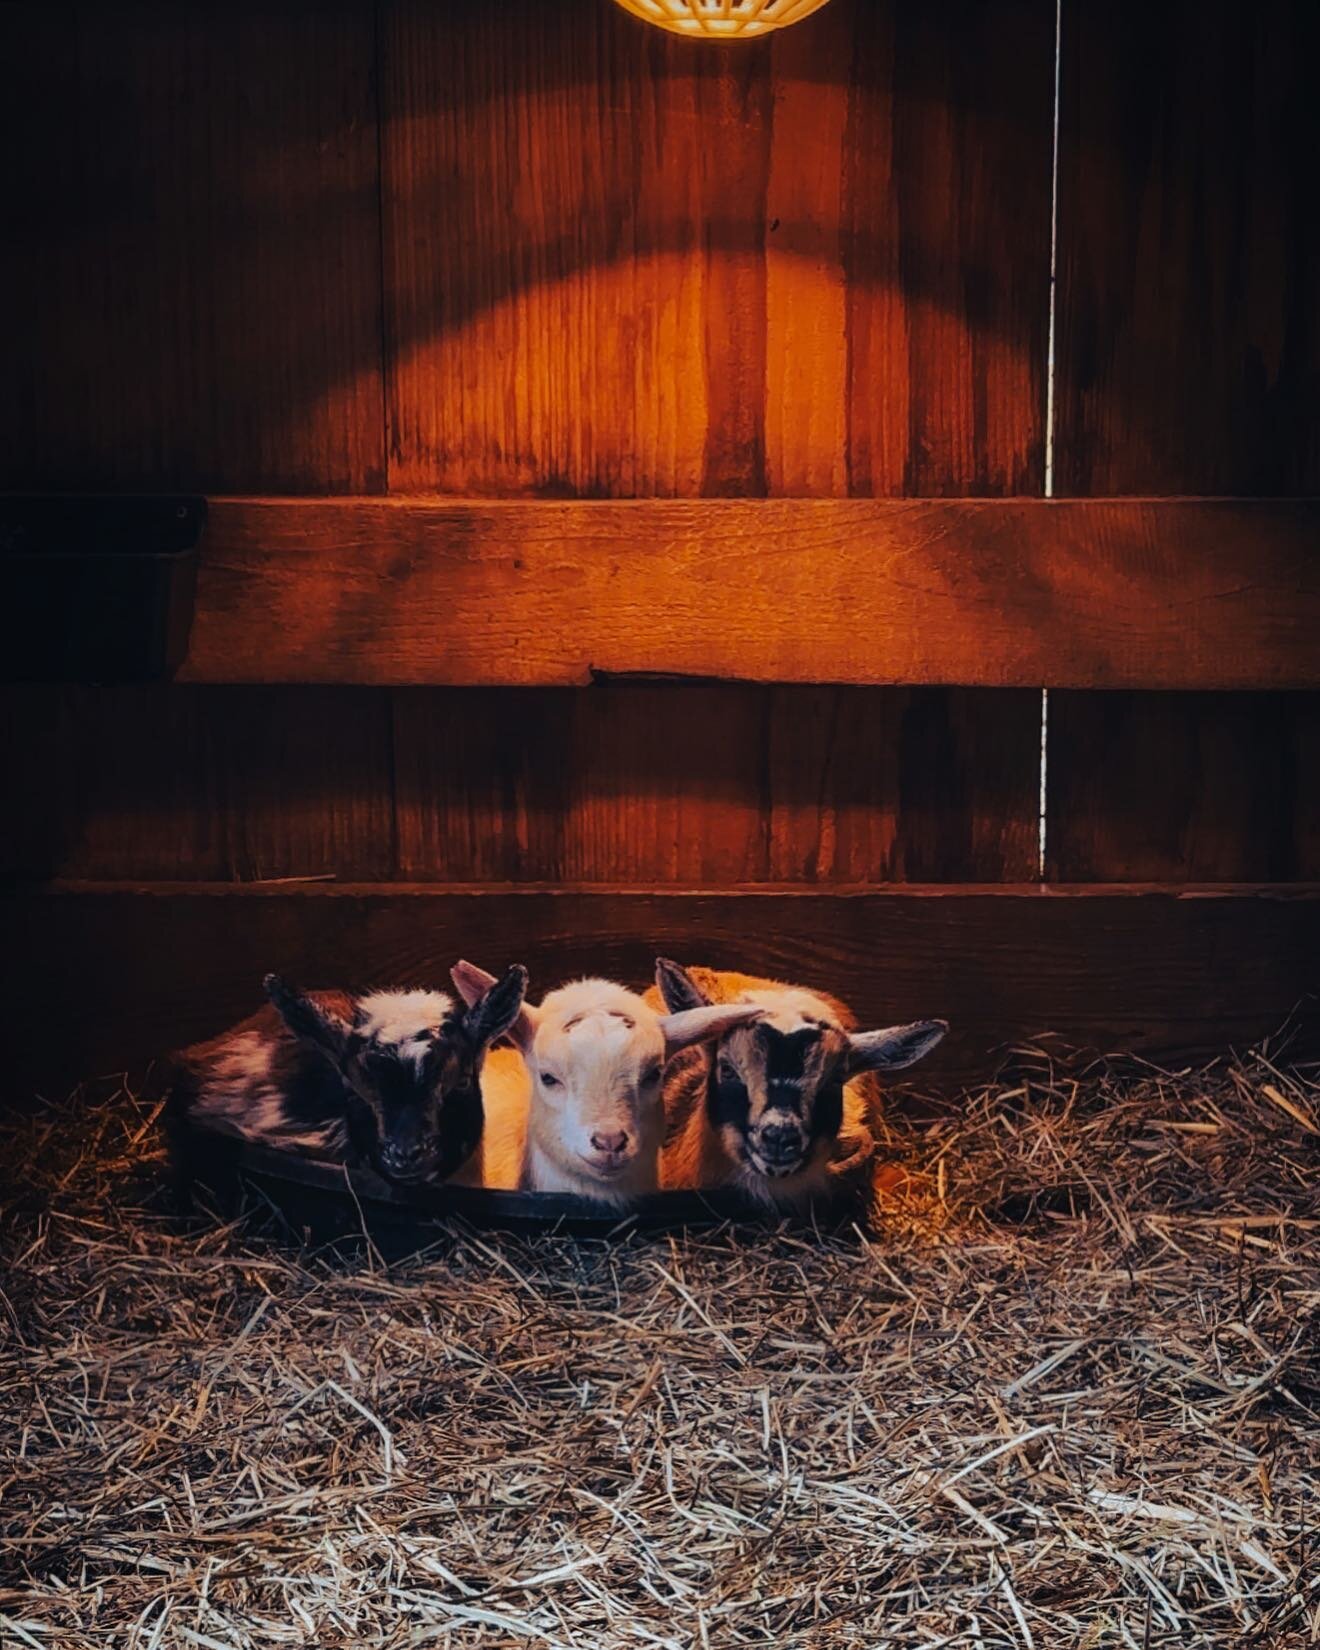 Three of Willow&rsquo;s four bucklings were easily switched to the bottle, but the fourth will not budge. He&rsquo;s just out of the frame, munching on hay while these three doze off under the heat lamp with bellies full of milk. #babygoats #nigerian